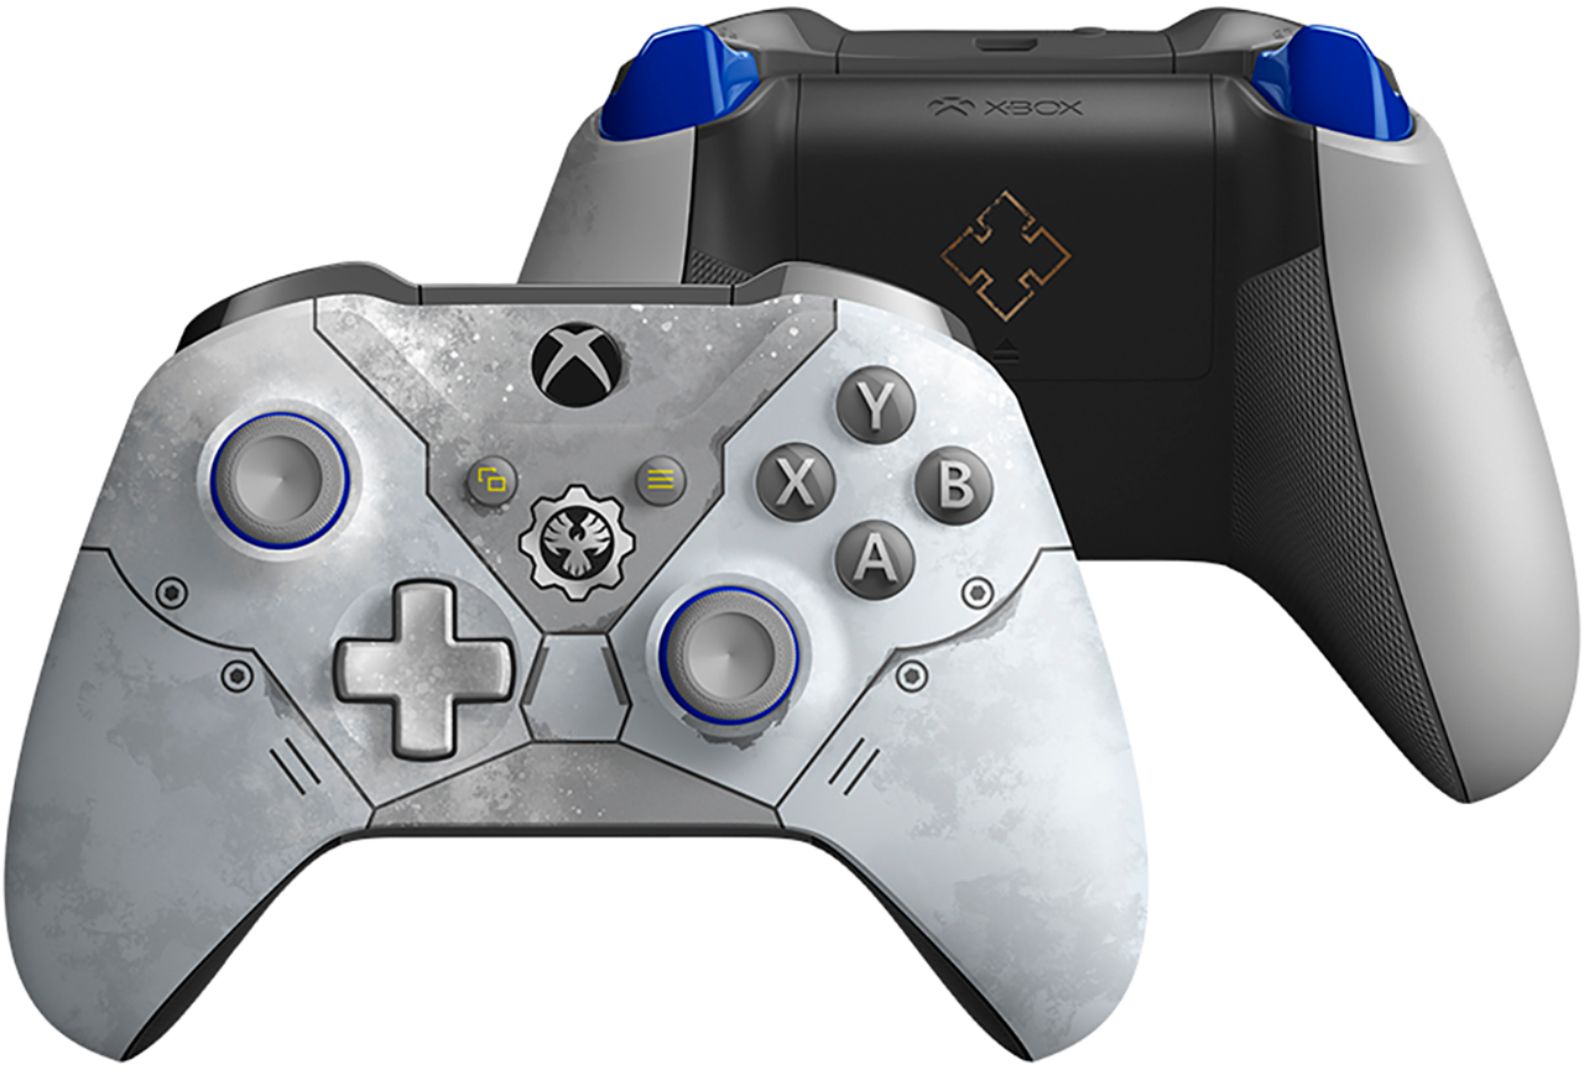 Microsoft Geek Squad Certified Refurbished Xbox Gears 5 Kait Diaz Limited  Edition Wireless Controller for PC, Xbox One, One S & X White GSRF  WL3-00130 